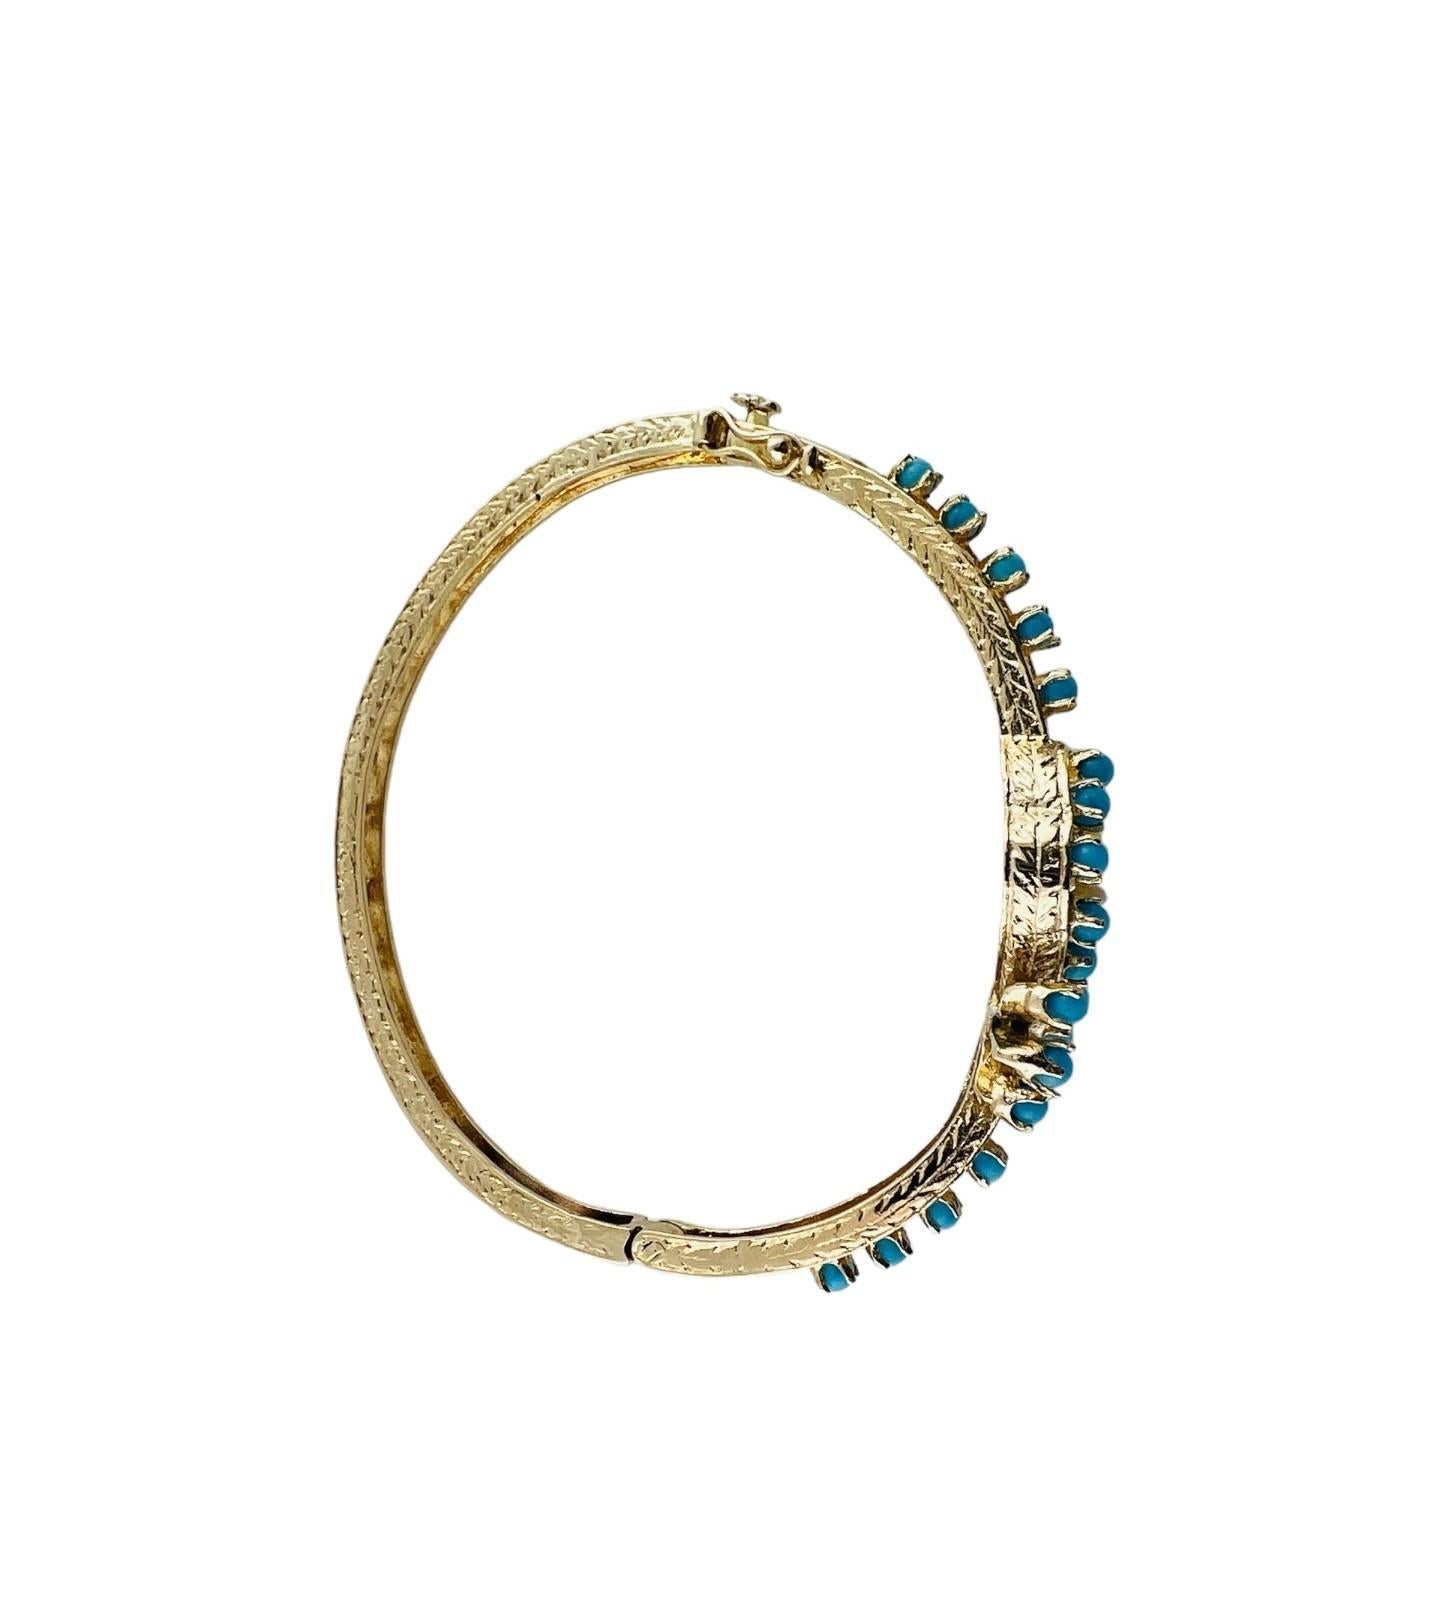 Round Cut 14K Yellow Gold Pearl and Turquoise Bangle Bracelet #16681